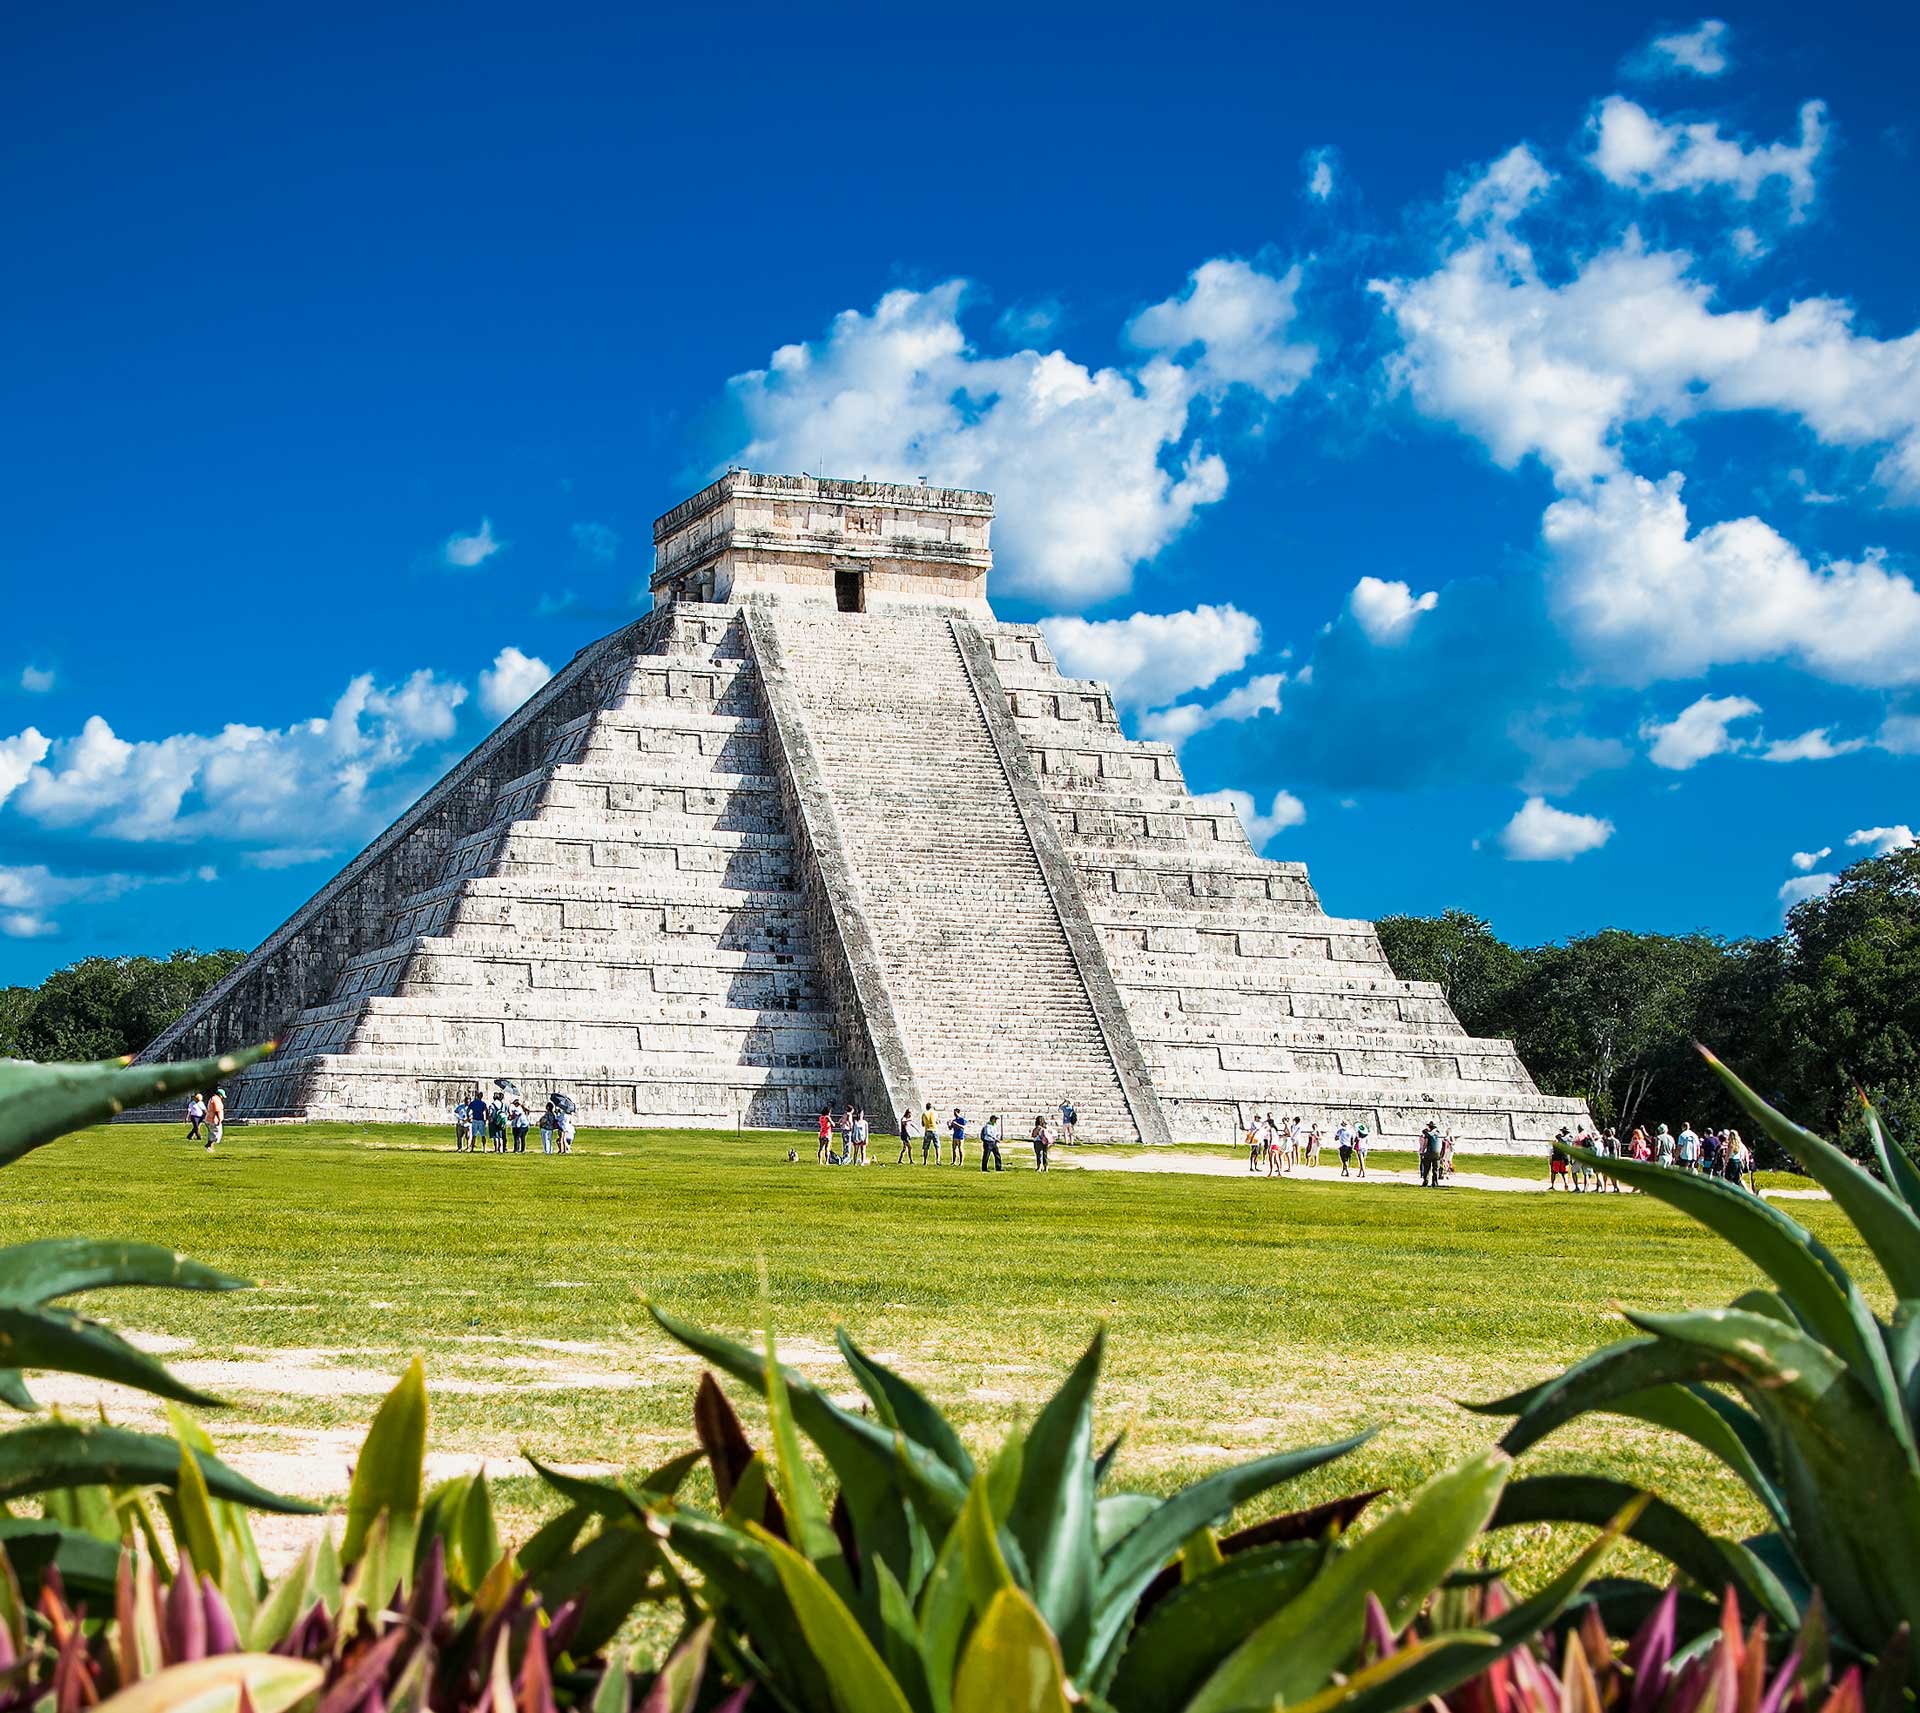 Chichen Itza, one of the most visited archaeological sites in Mexico. About 1.2 million tourists visit the ruins every year.